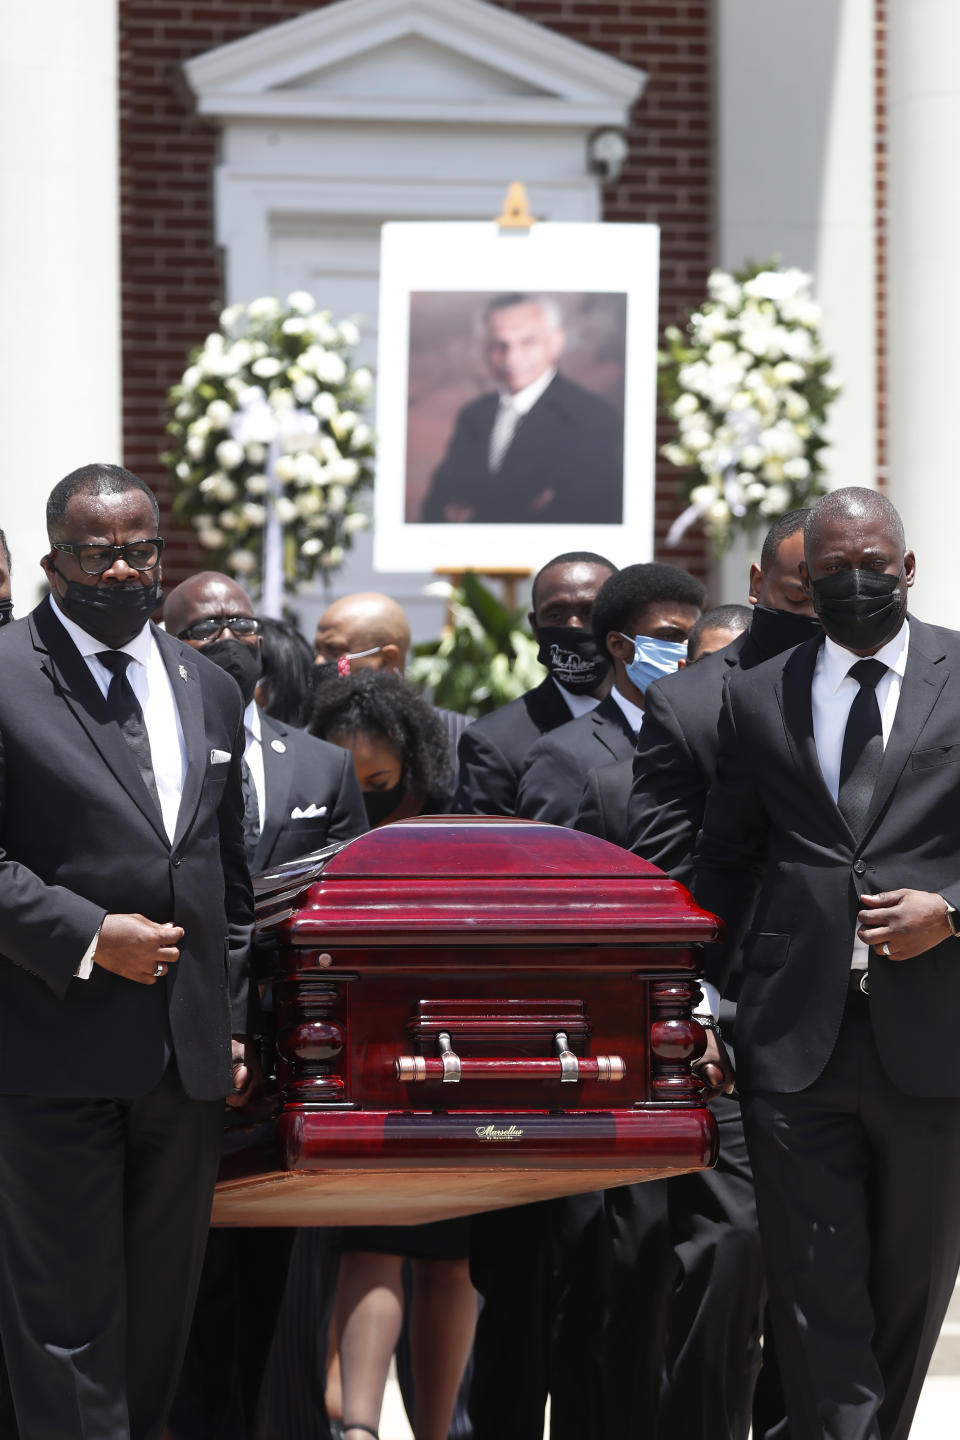 The casket containing the remains Rev. C.T. Vivian is carried from Providence Missionary Baptist Church after a funeral service Thursday, July 23, 2020, in Atlanta. (AP Photo/John Bazemore)